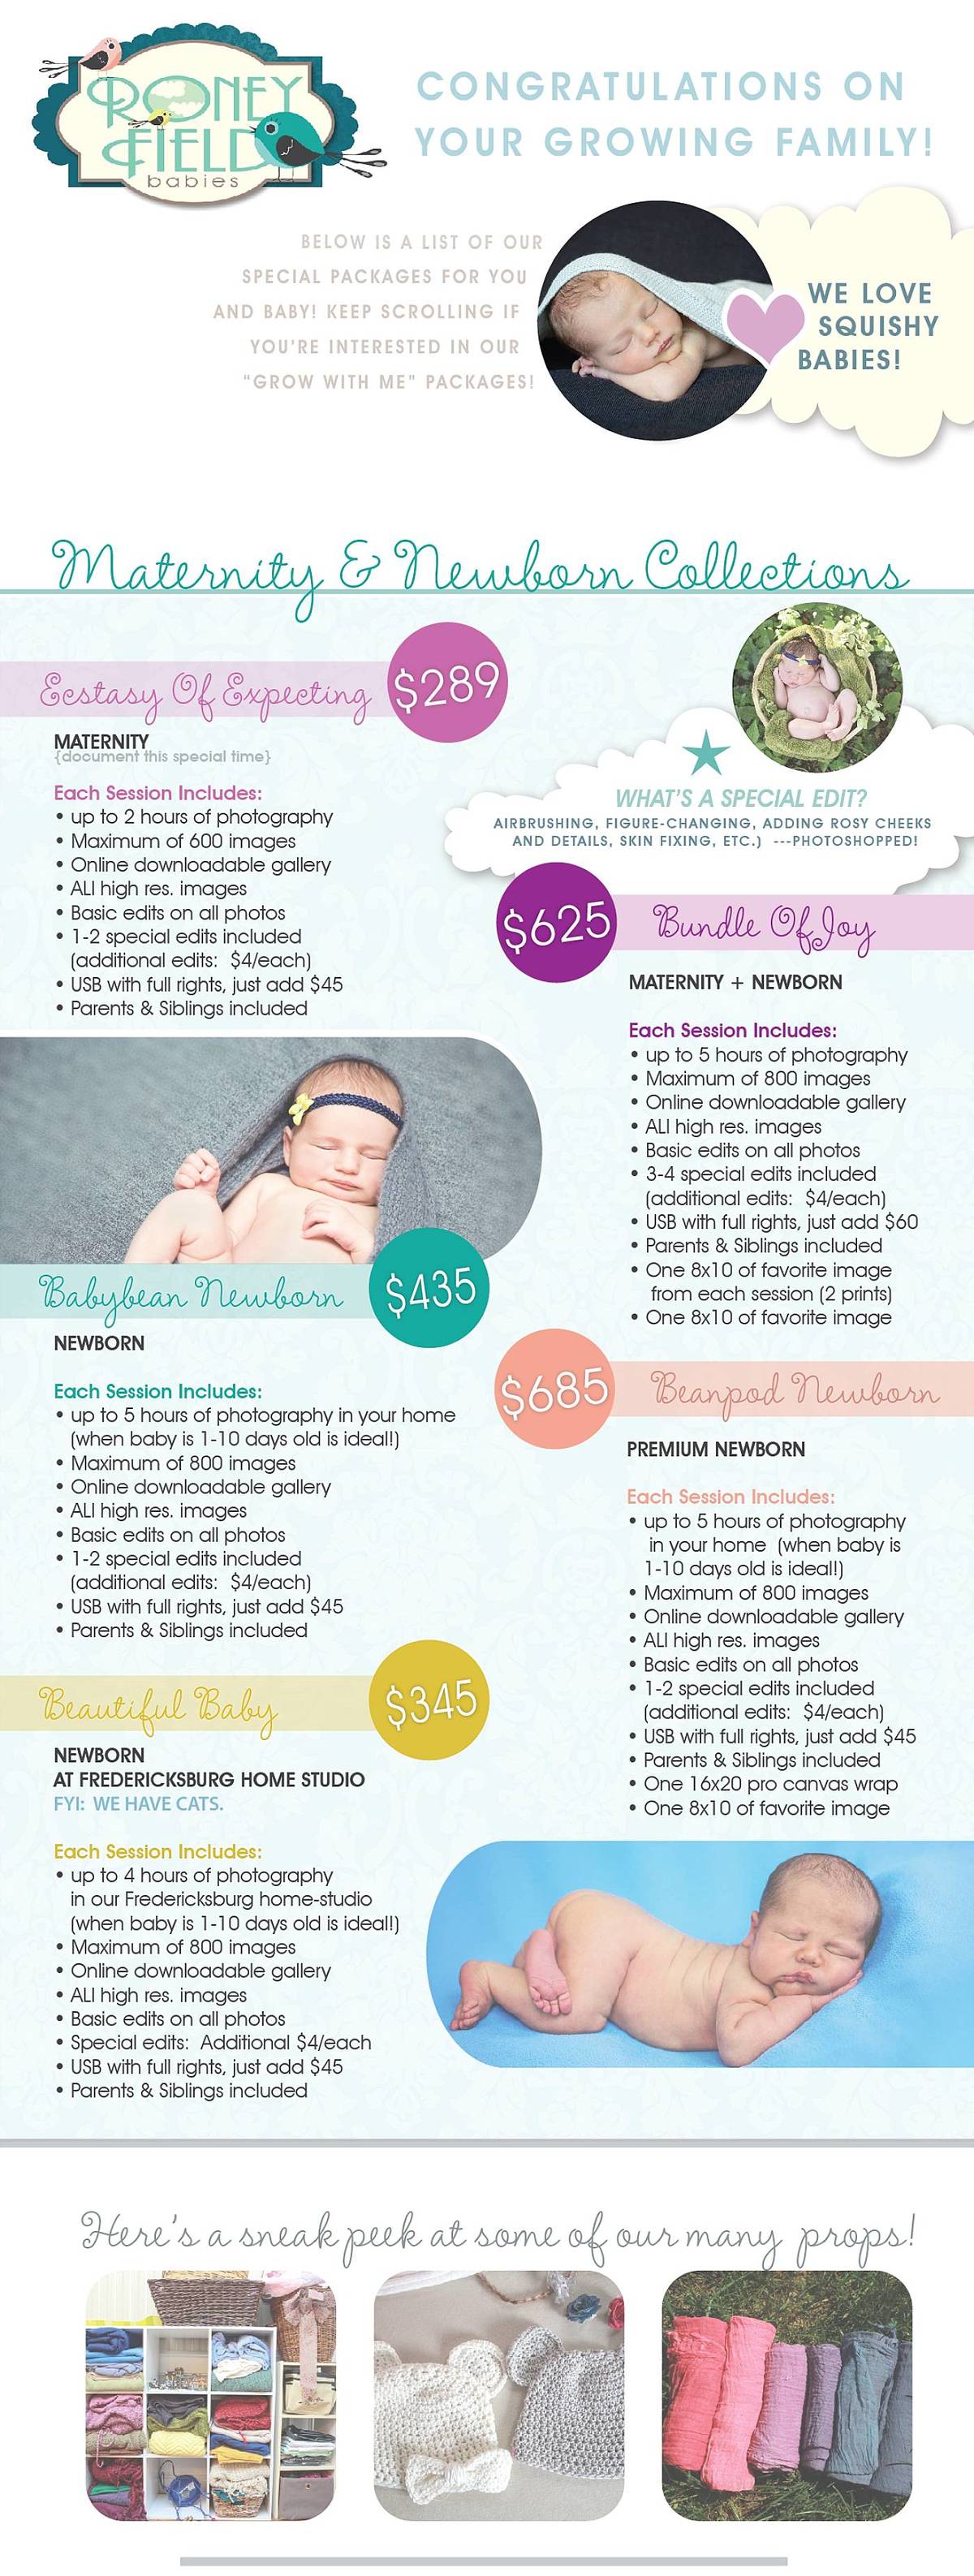 Maternity & Newborn Packages